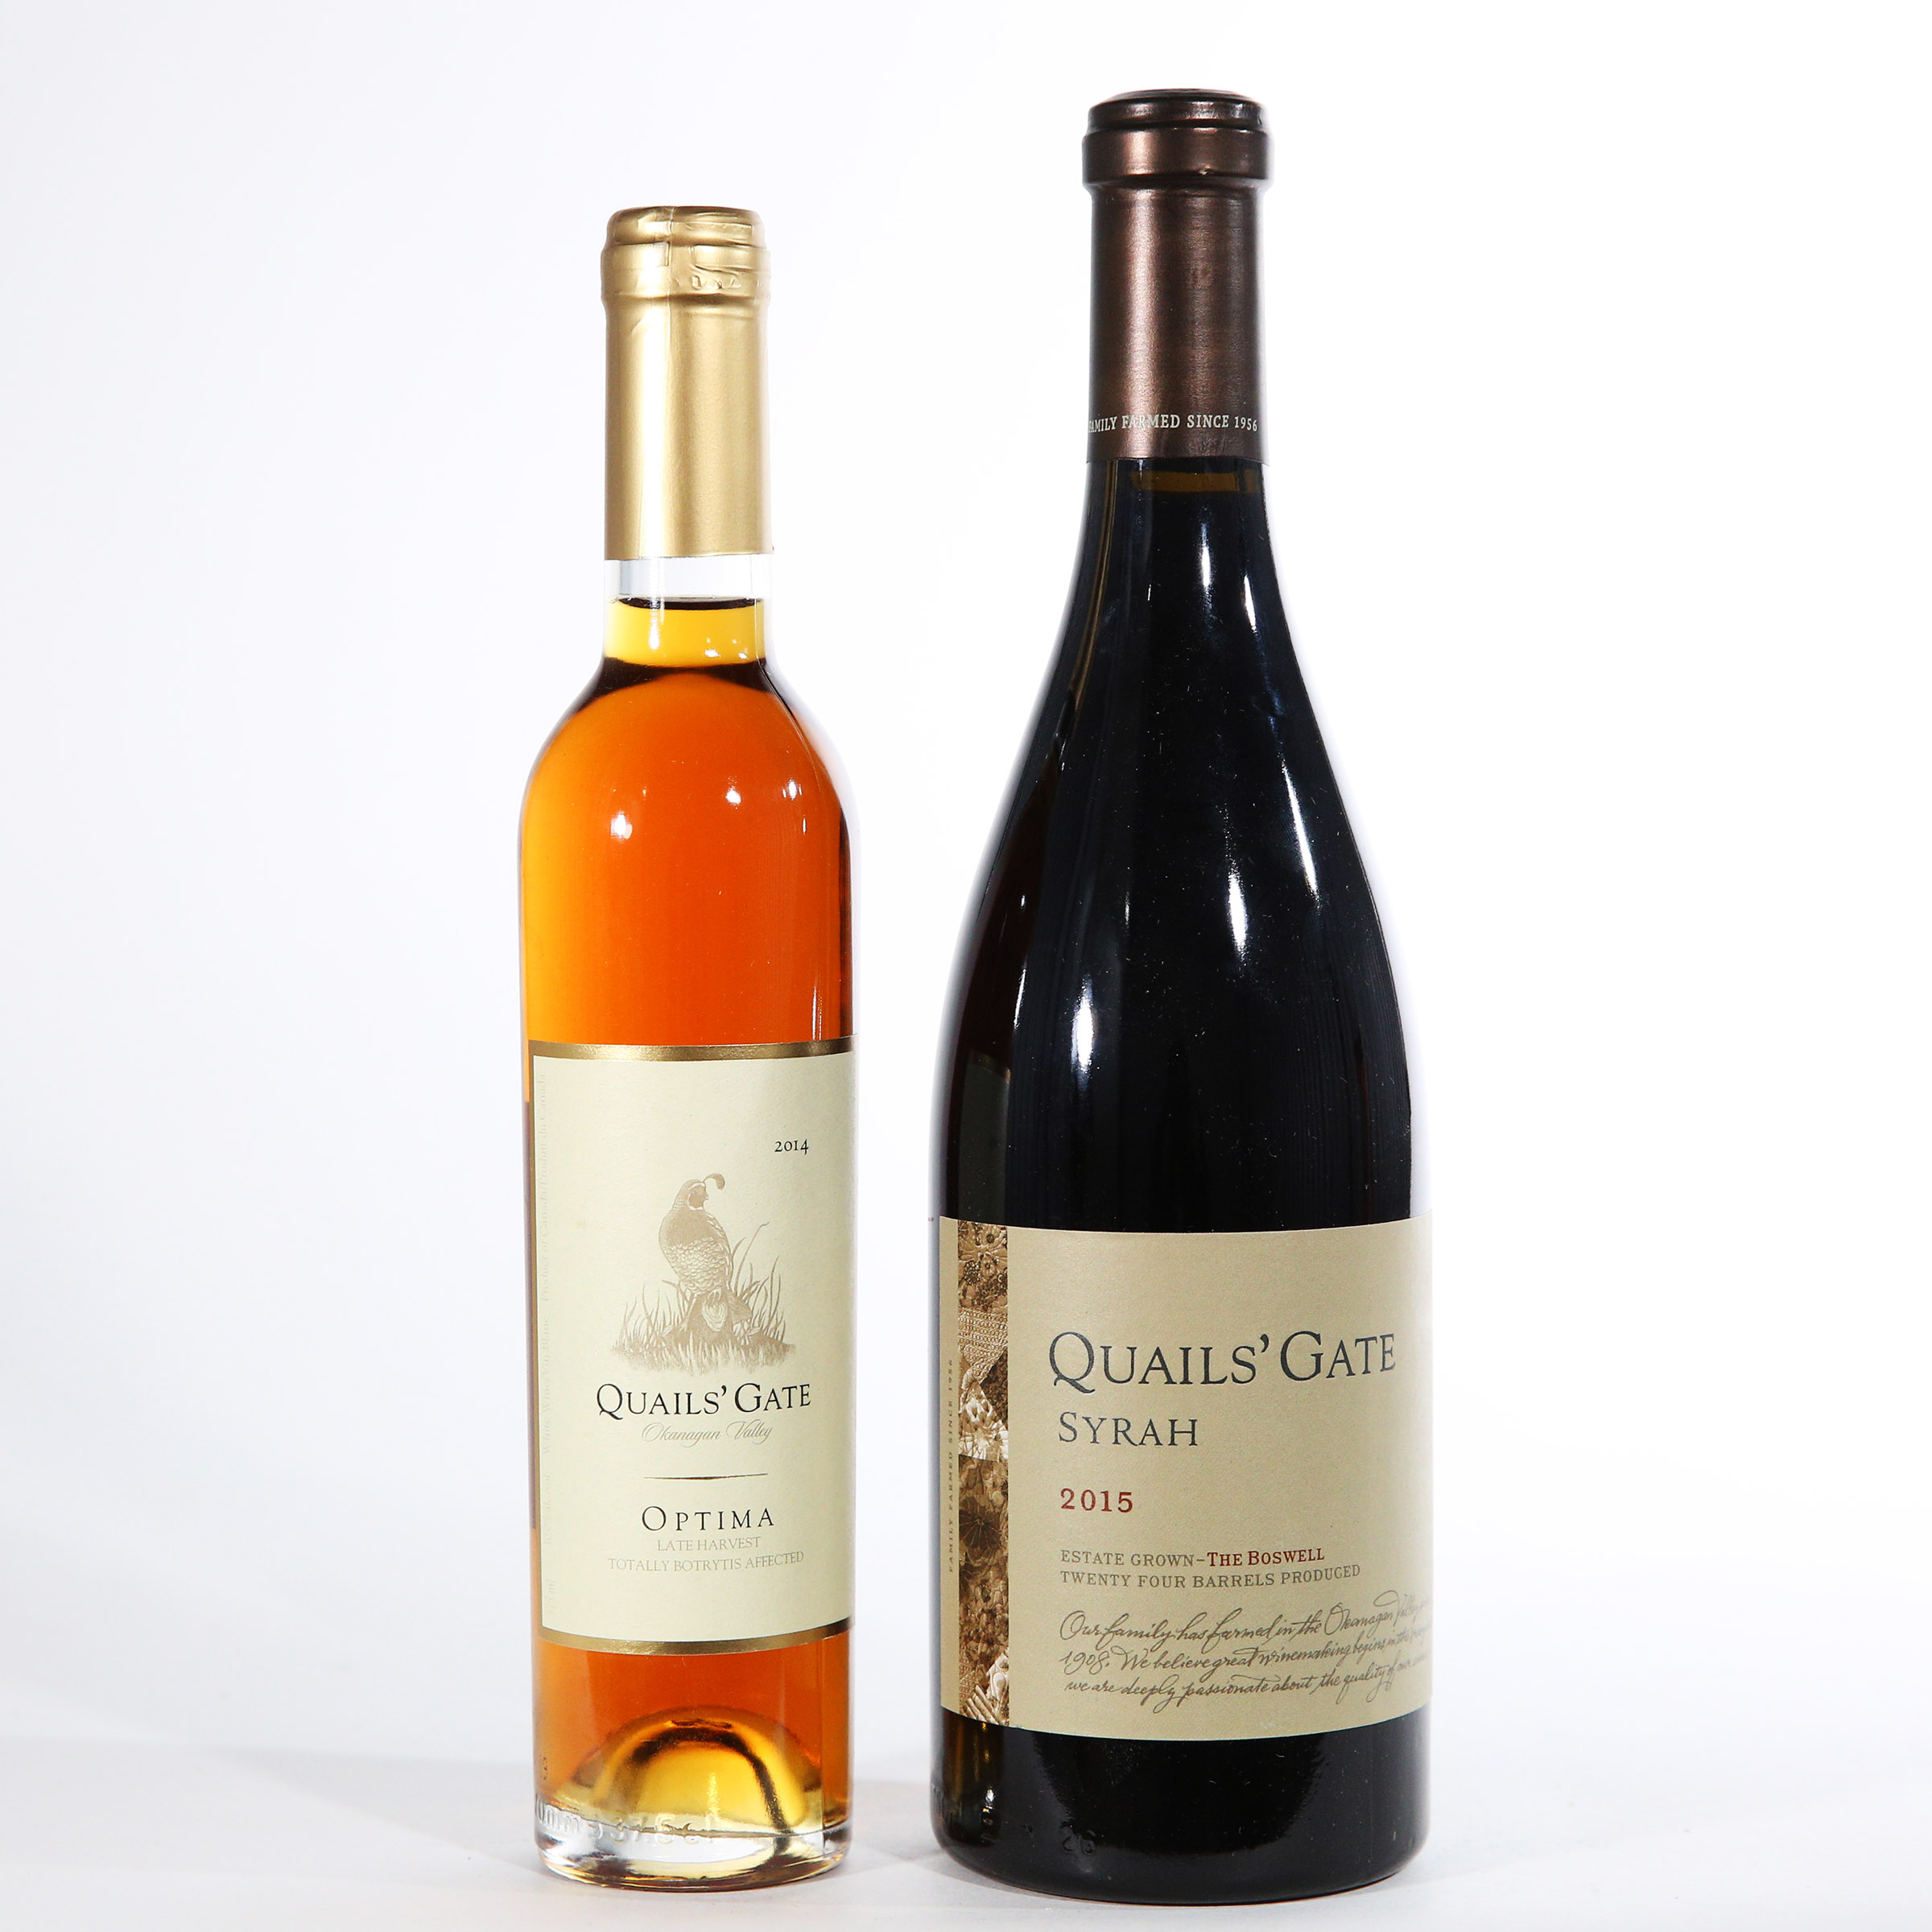 QUAILS' GATE ESTATE WINERY OPTIMA LATE HARVEST BOTRYTIS AFFECTED 2014 (1 HF. BT.)
QUAILS' GATE ESTATE WINERY SYRAH THE BOSWELL 2015 (1)